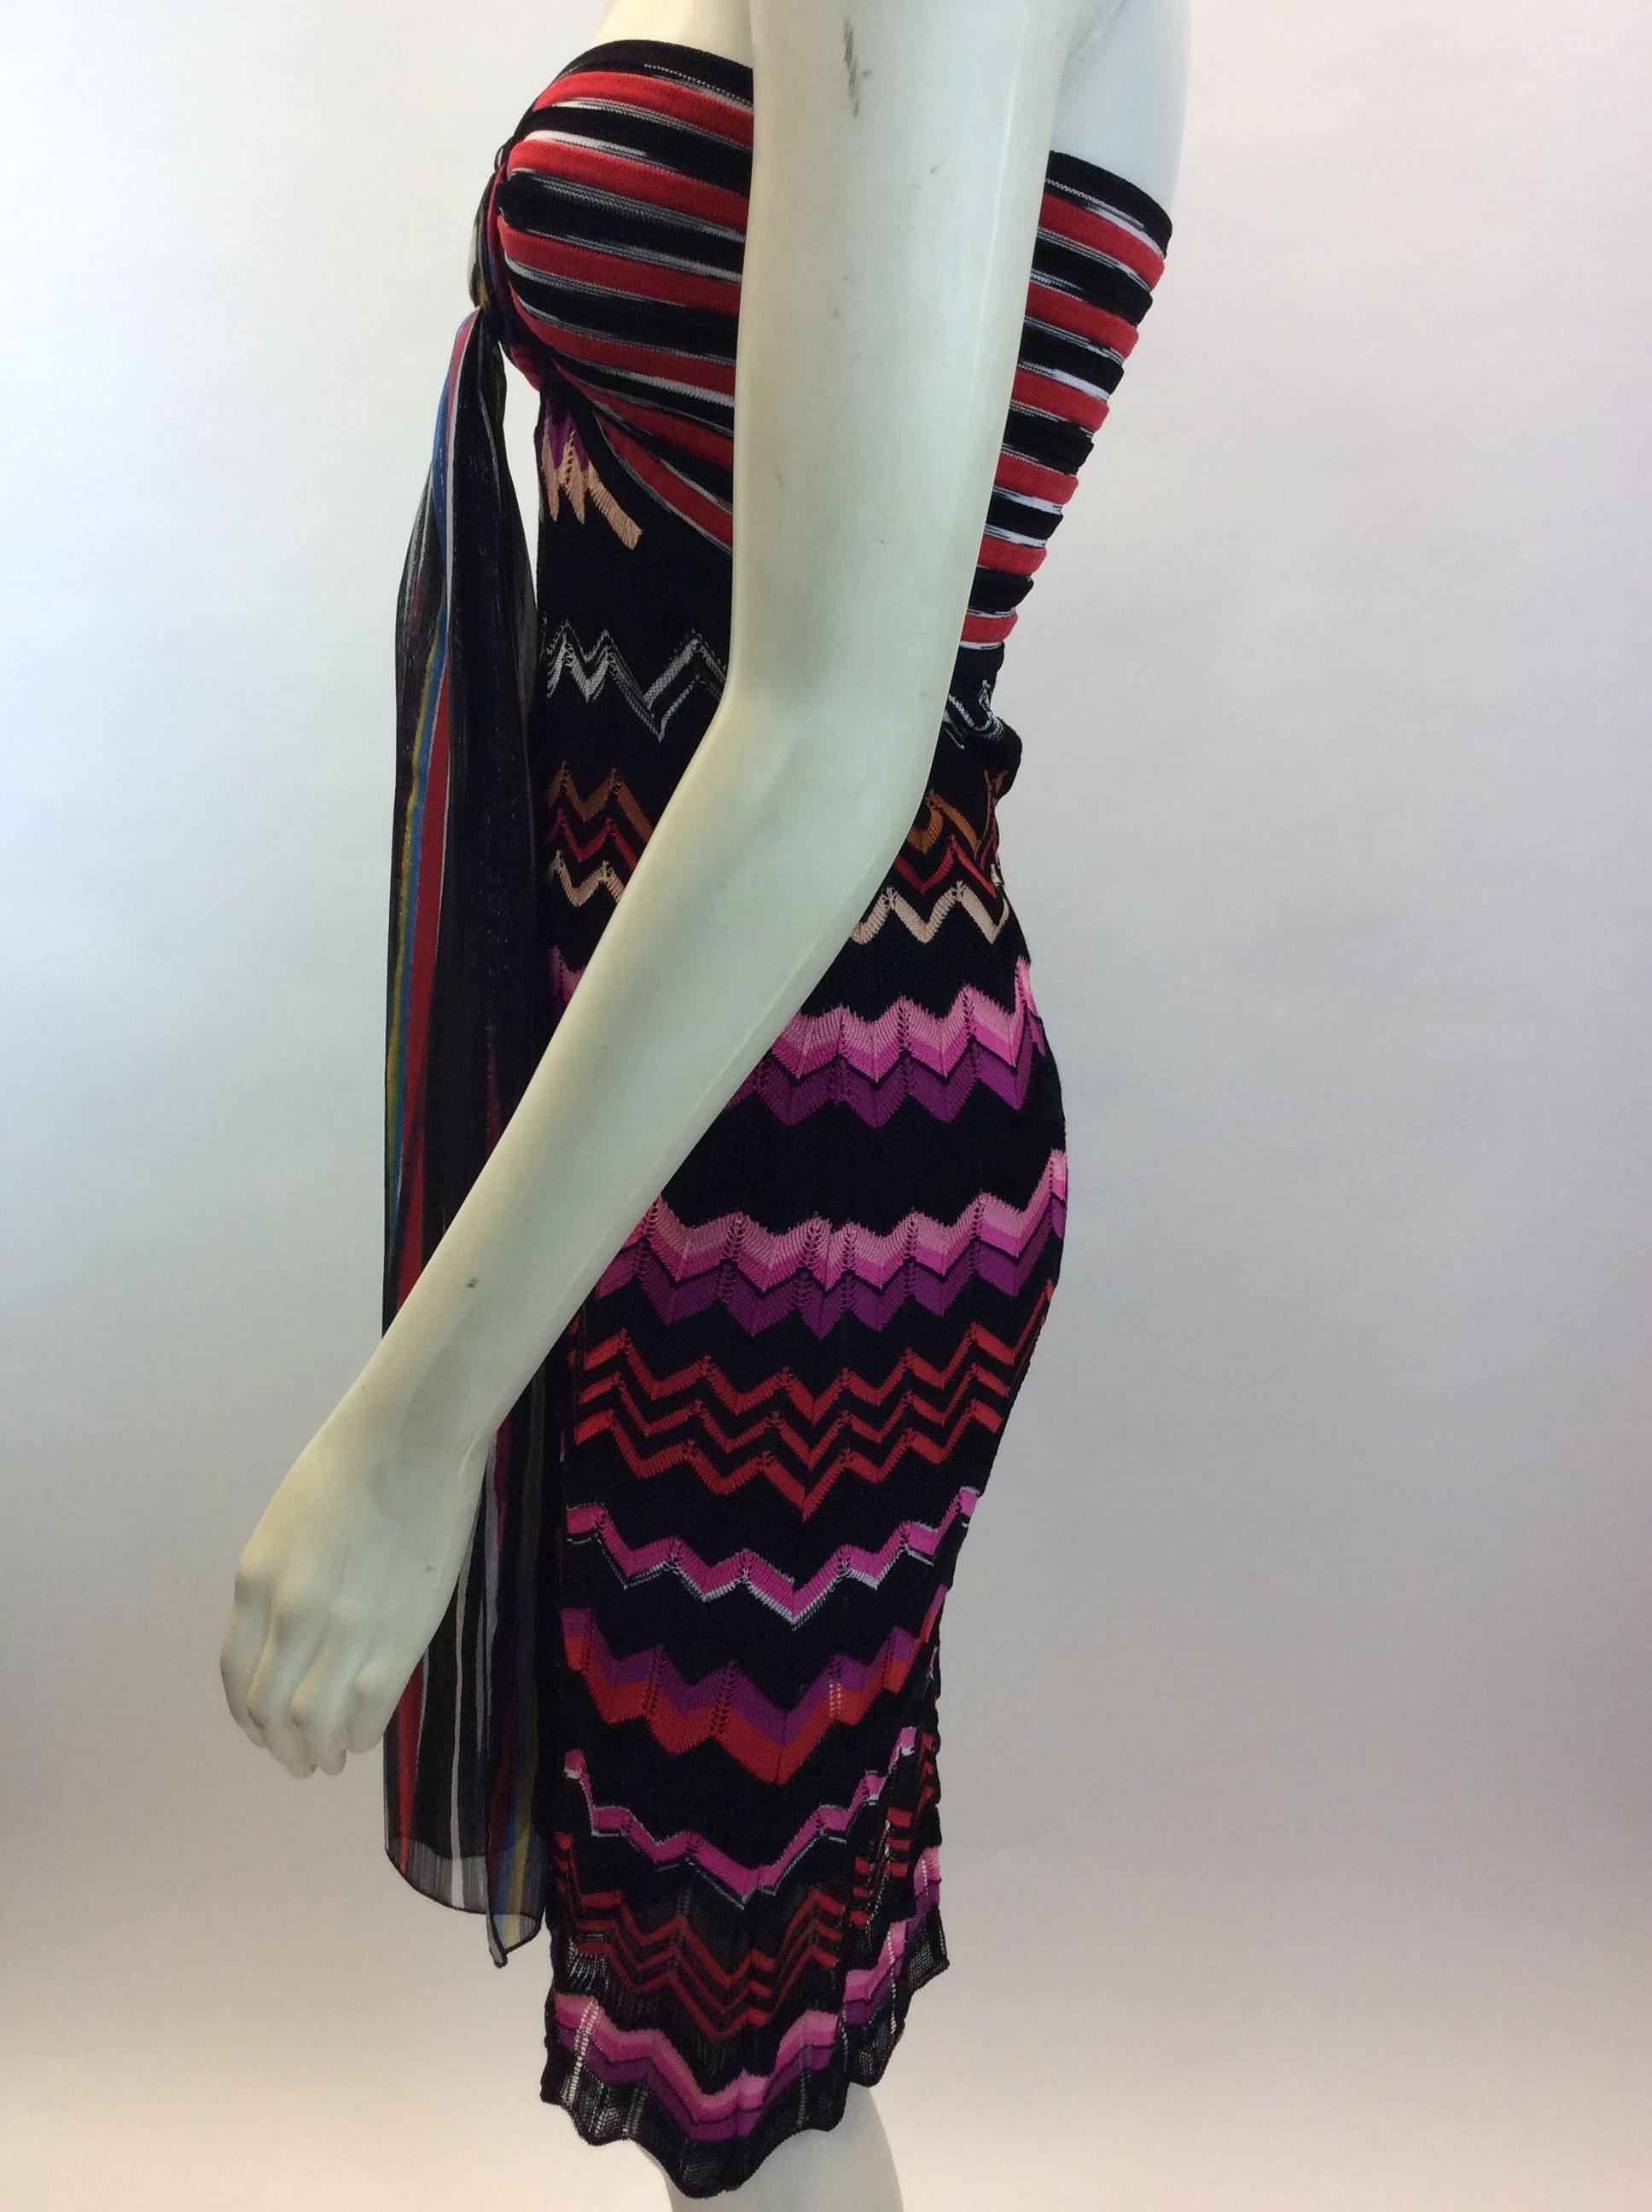 Missoni Multi-Color Striped Strapless Dress
$278
Made in Italy
73% Viscose, 27% Cotton
Size 4
Length 32